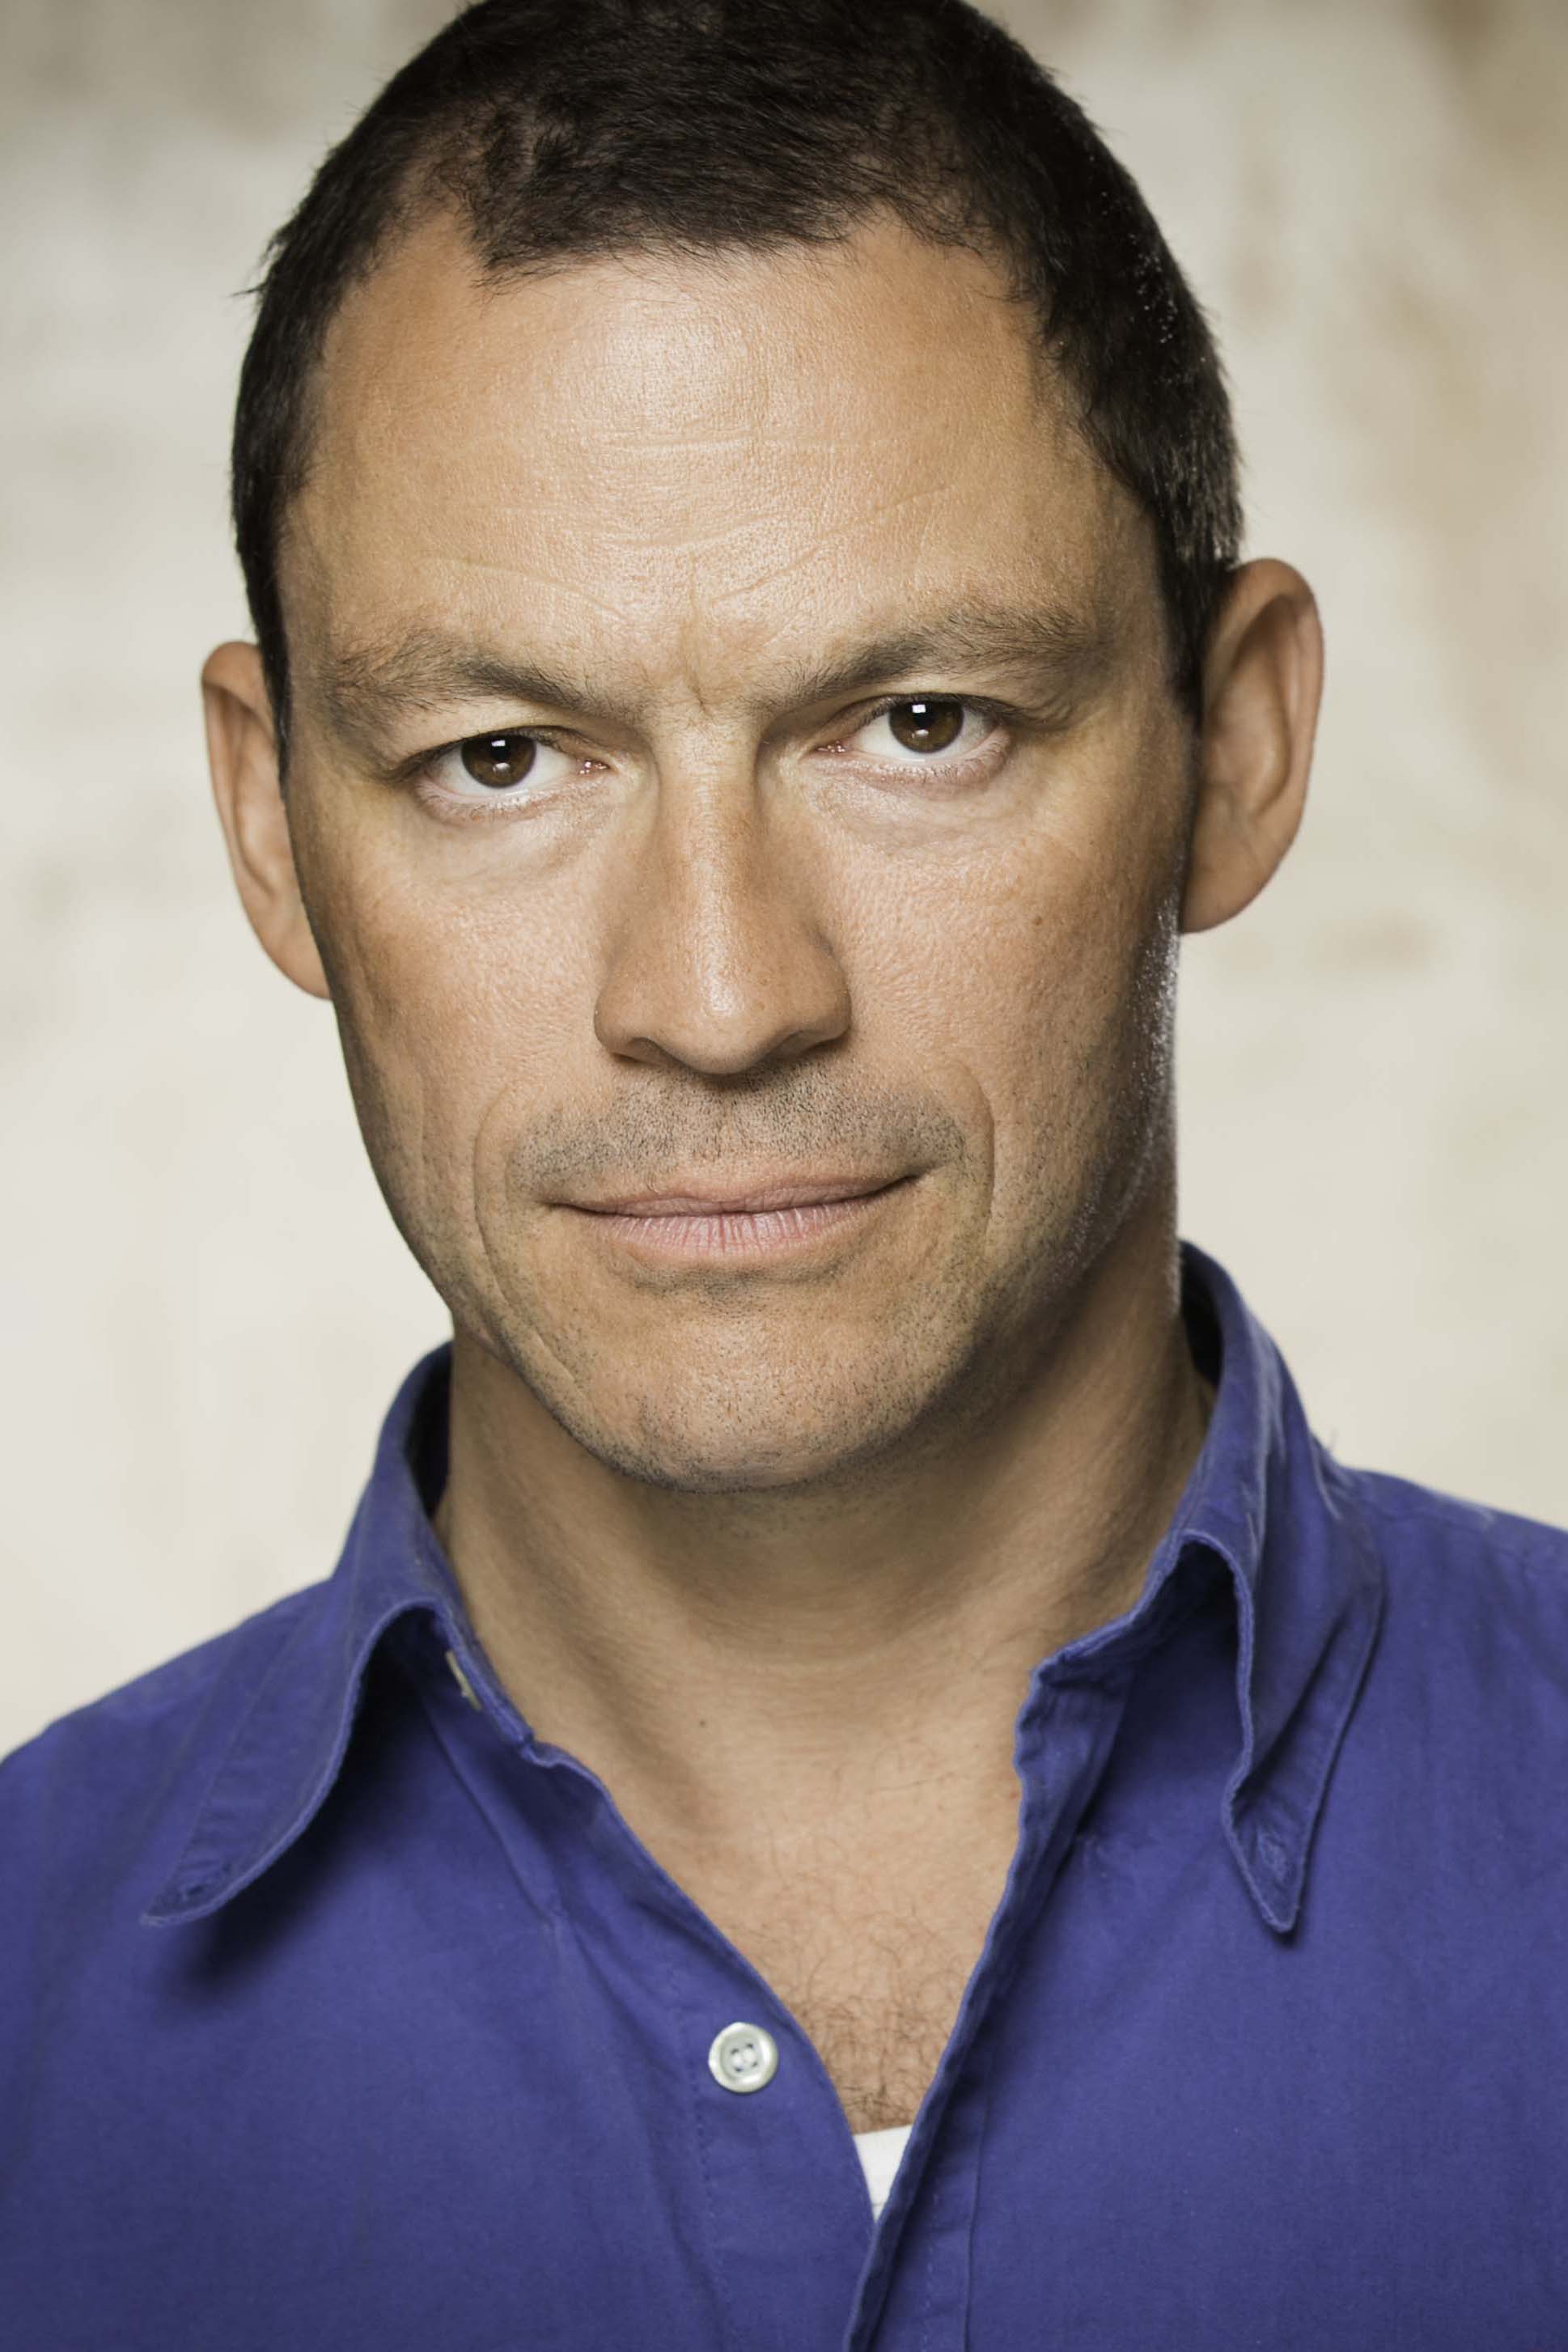 How tall is Dominic West?